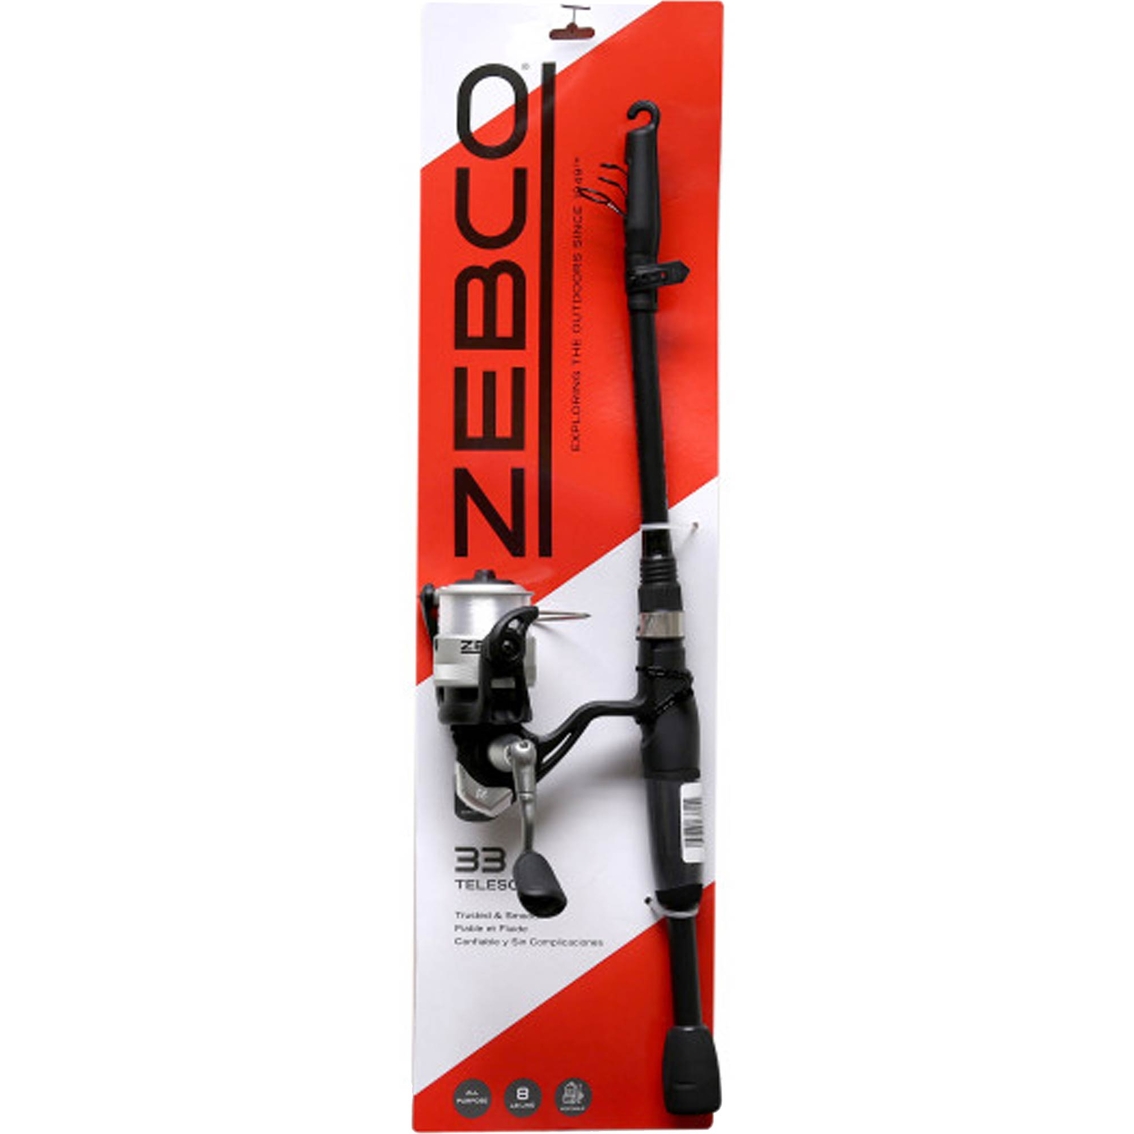 Zebco 33SP Telecast 30SZ 6 ft. Package Combo 8#C Fishing Equipment - Image 8 of 8